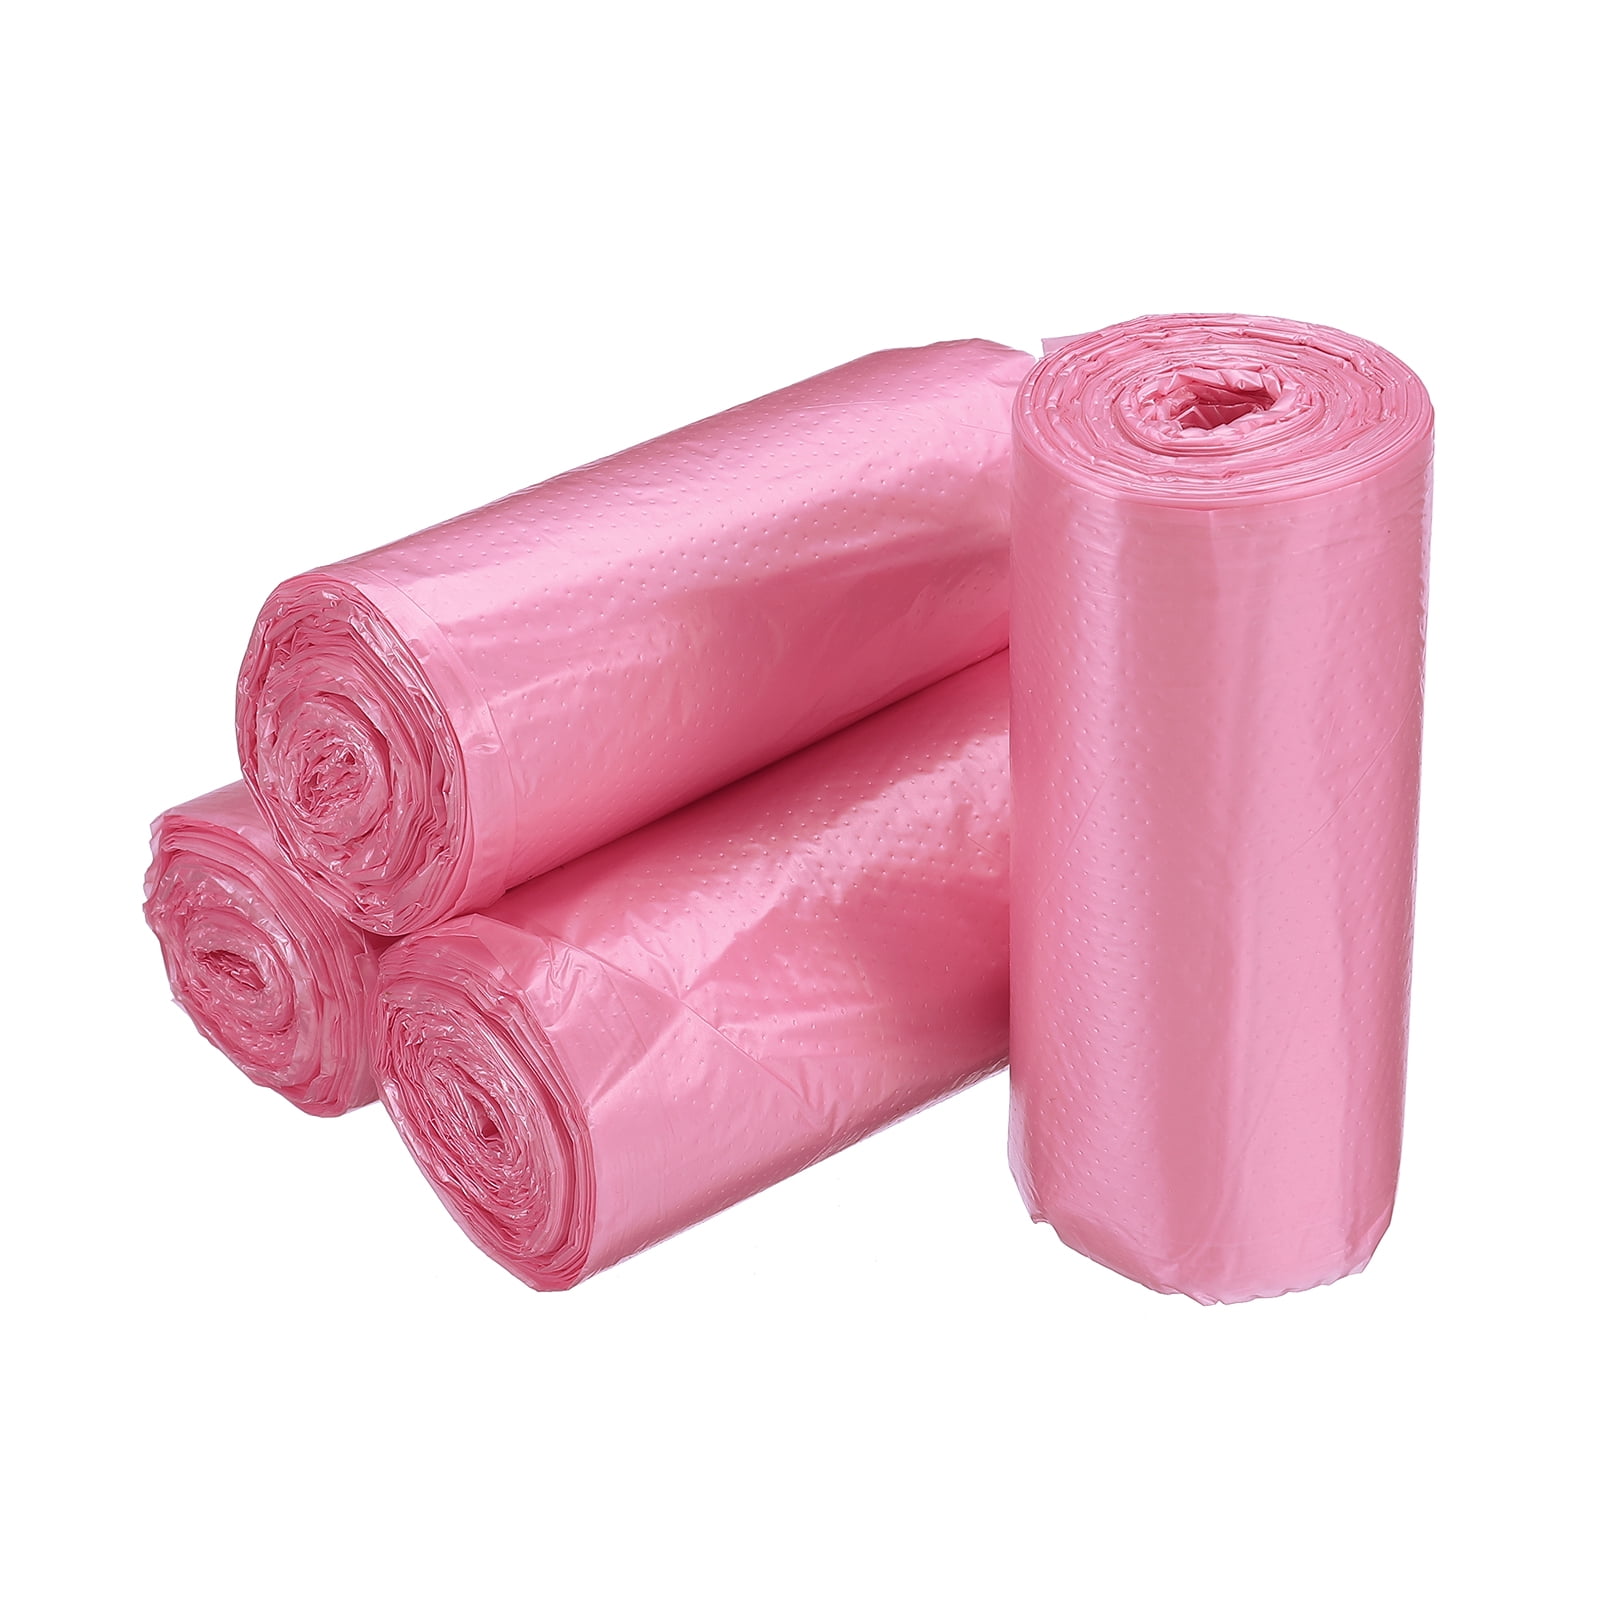 Uxcell 0.5 Gallon Small Trash Bags Garbage Bags PE Plastic Pink 6 Rolls ...